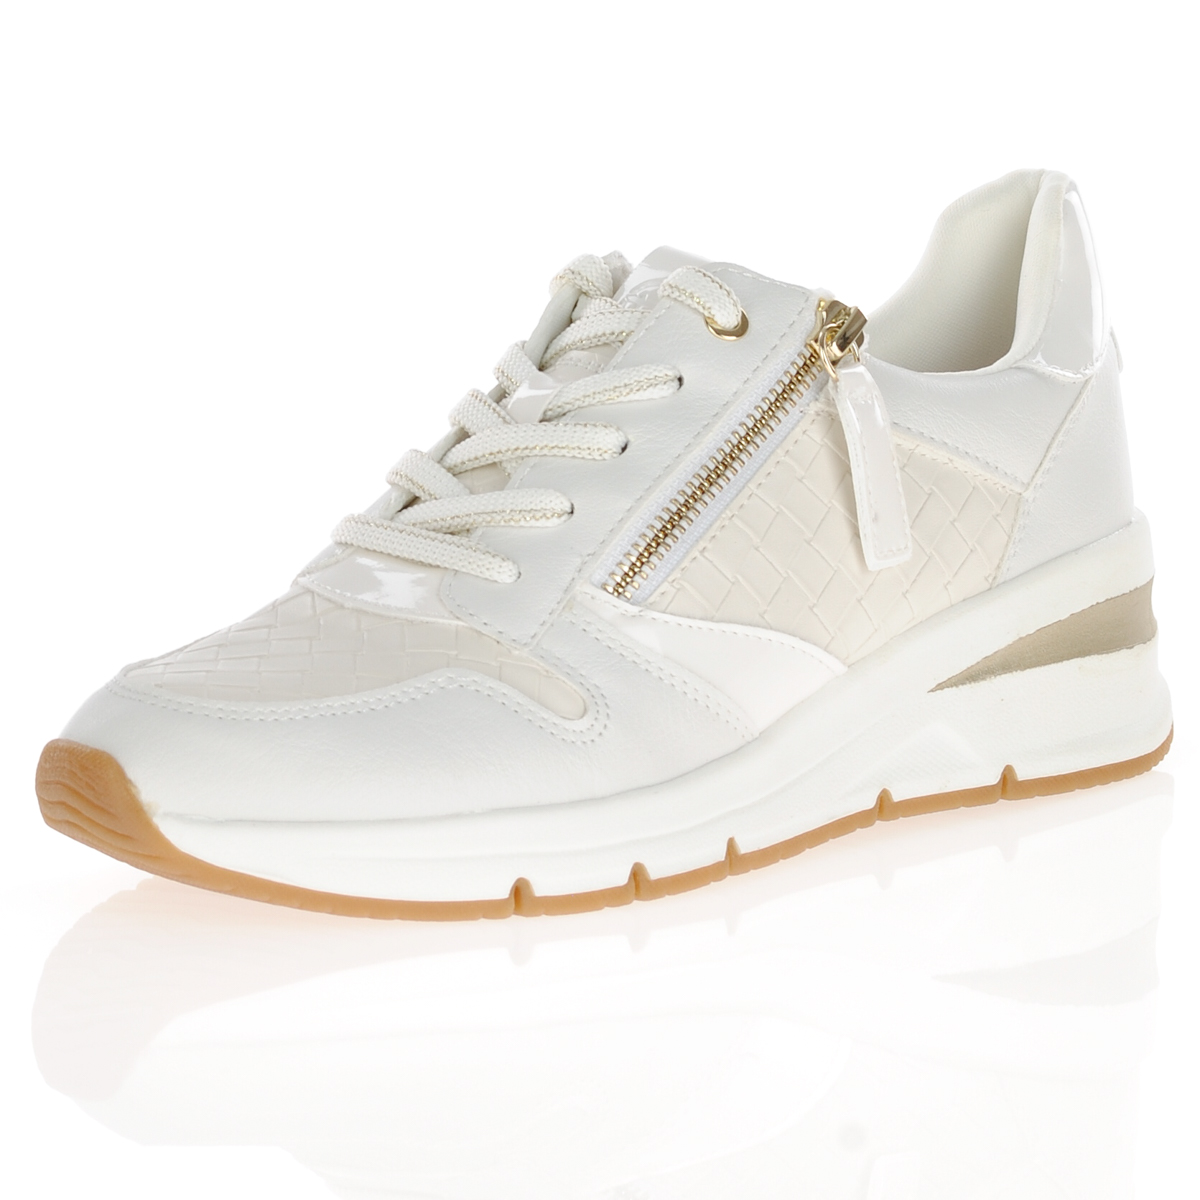 Tamaris - Low Wedge Trainers White - 23702, The